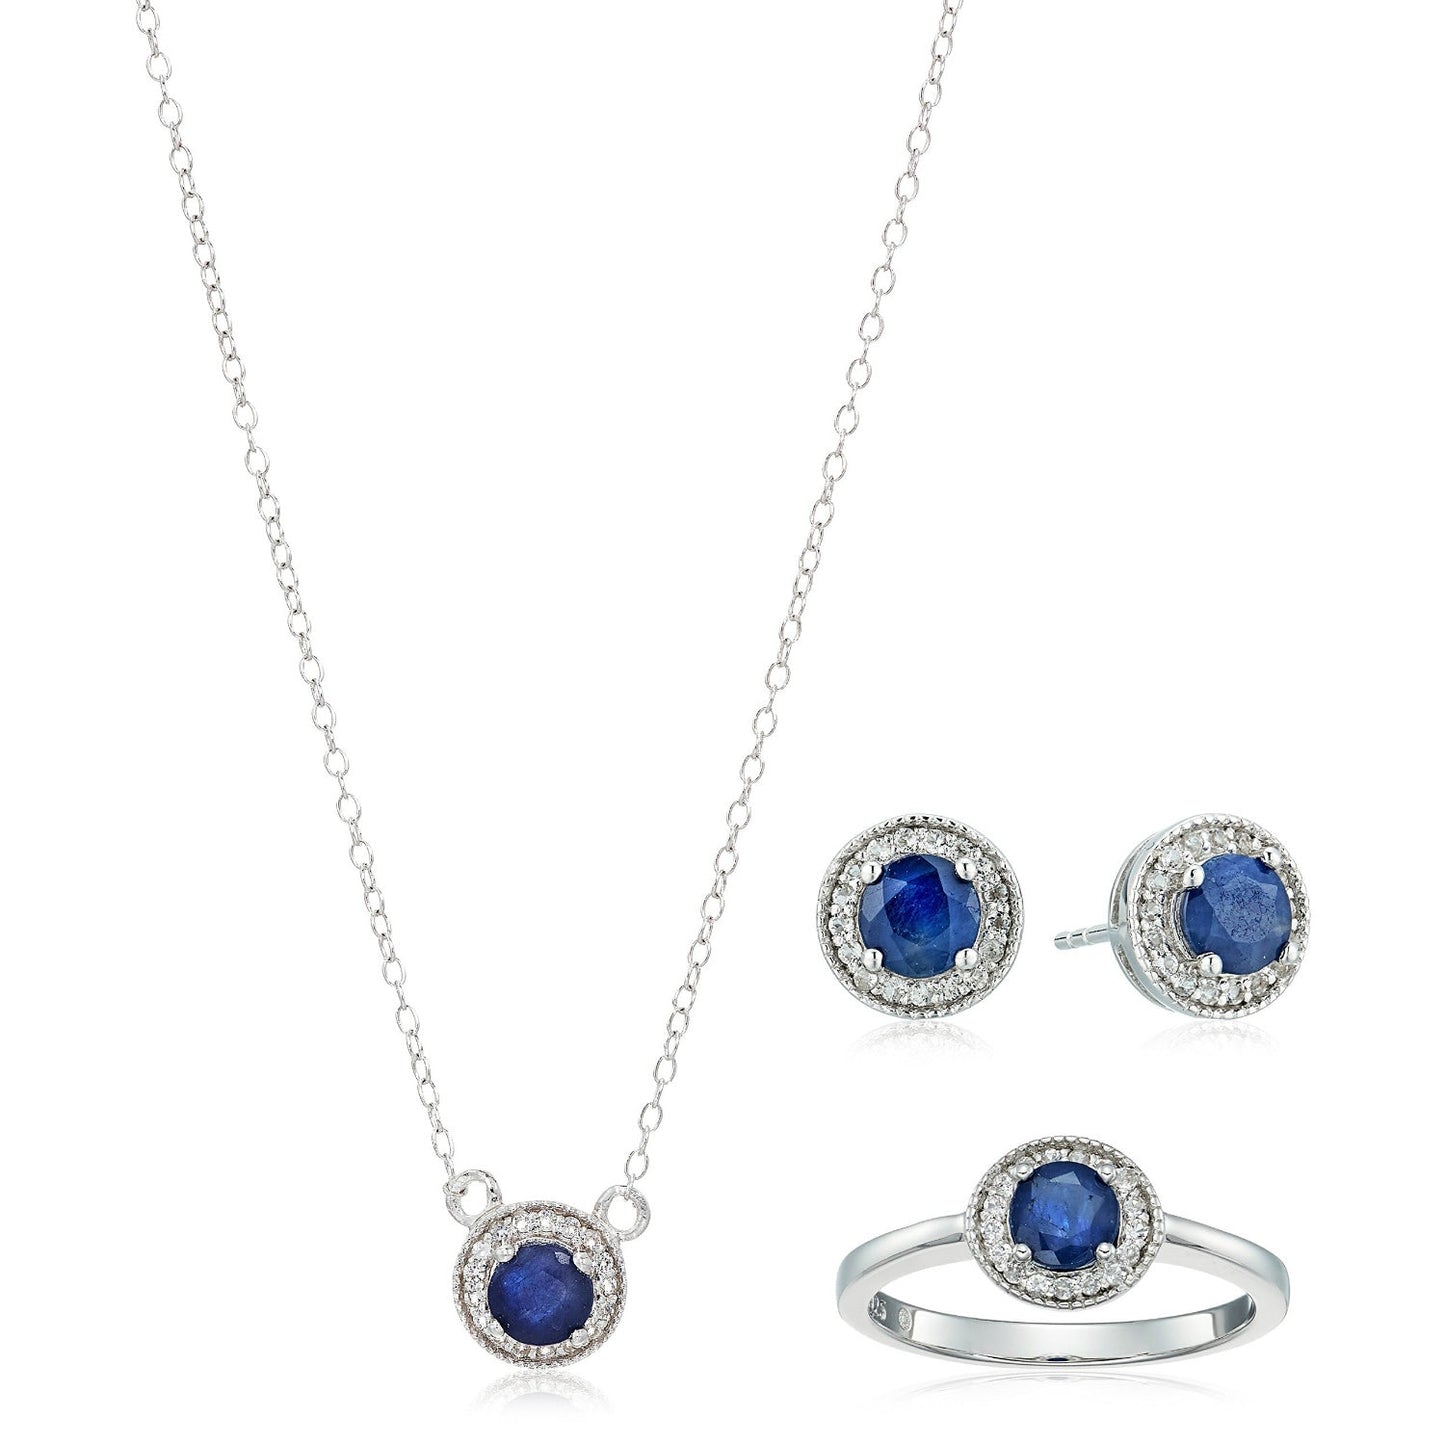 Natural Blue Sapphire Jewelry Set, Necklace With Studs And Ring, Bridal Jewelry Set, Birthstone Jewelry, Studs Earring, Necklace, Ring GIft